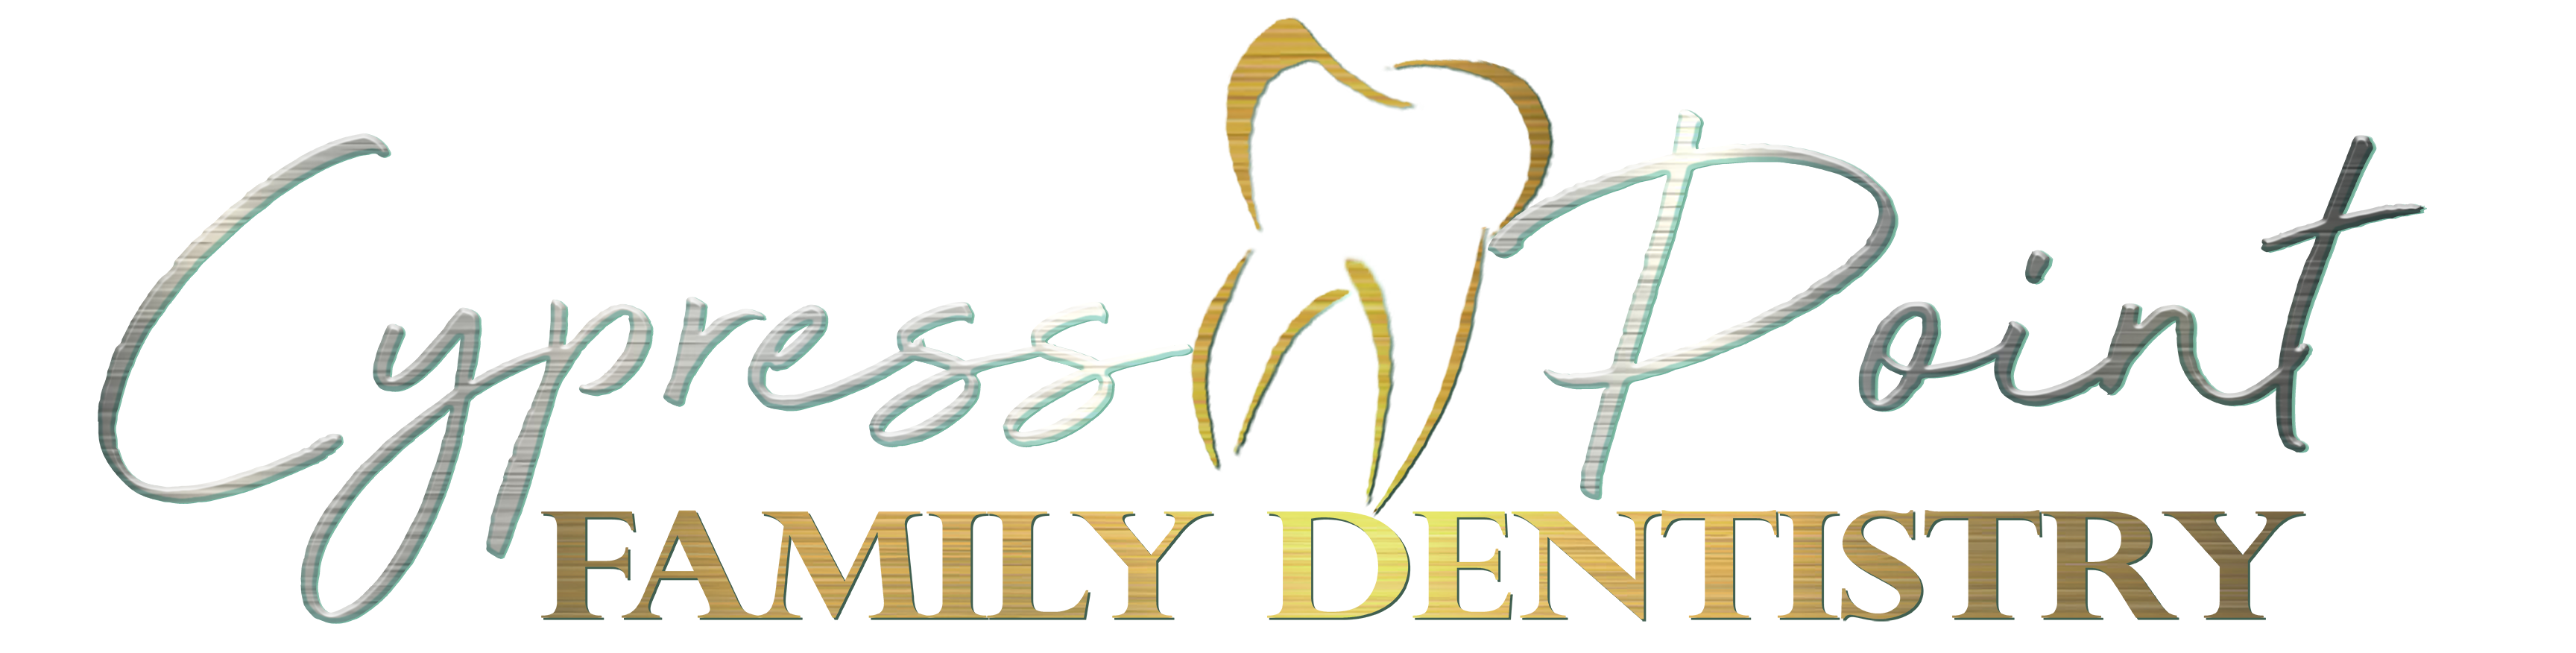 Cypress Point Family Dentistry